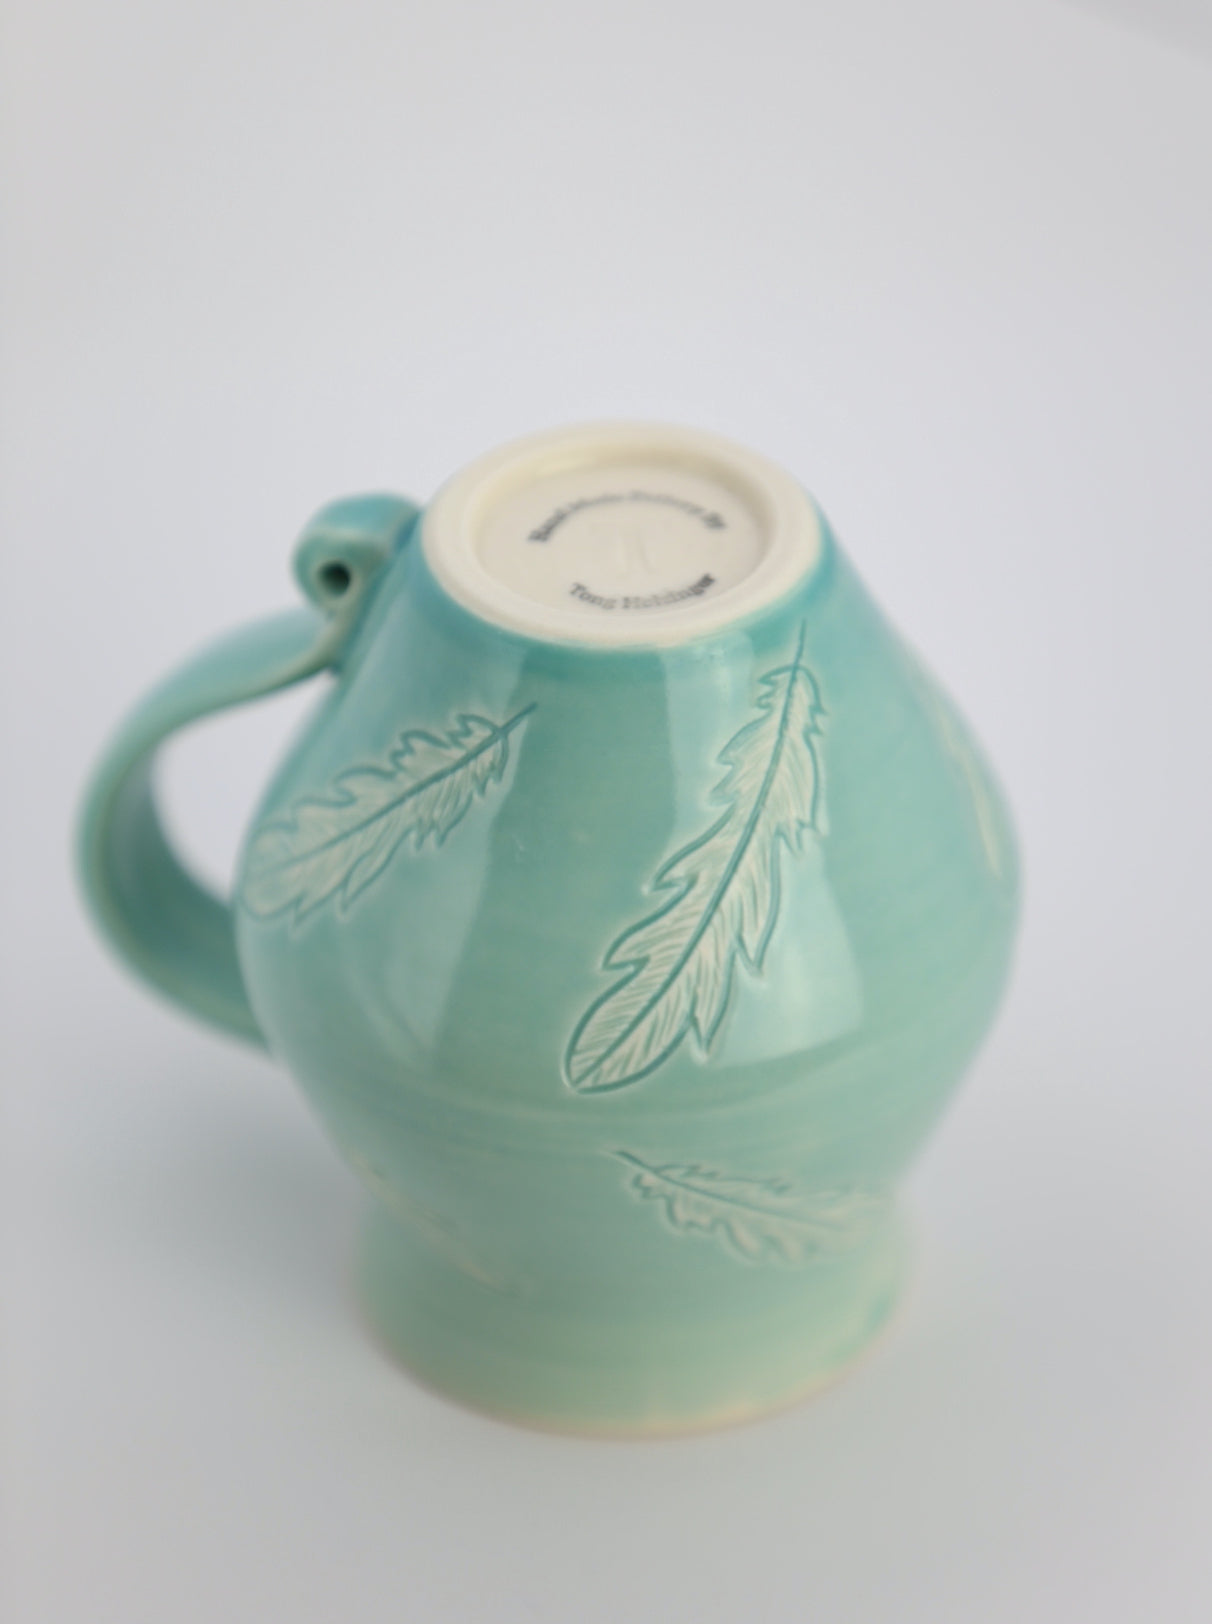 12 oz porcelain mug with feather carvings in turquoise